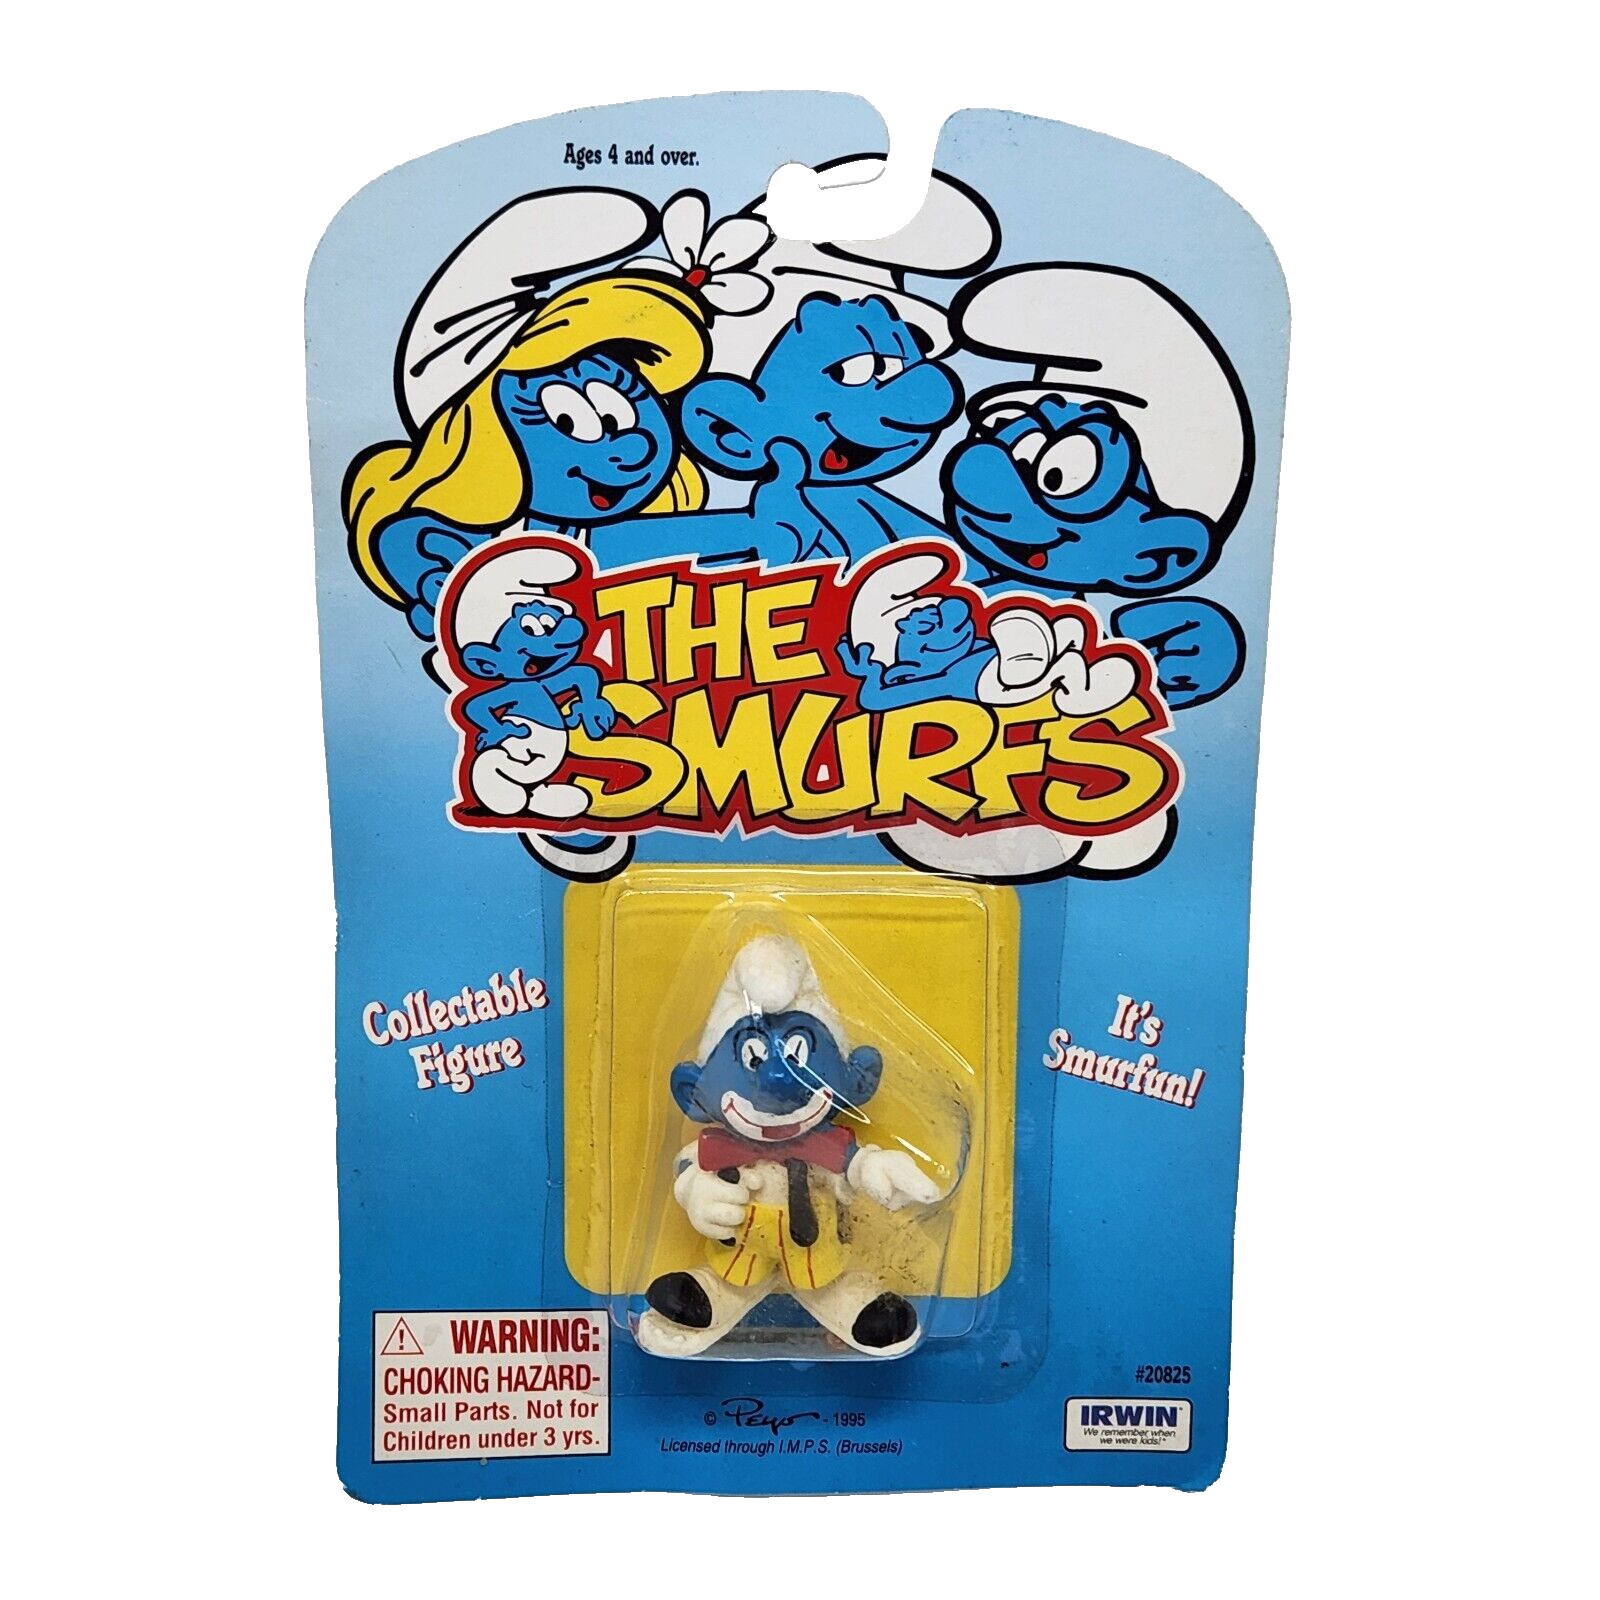 VINTAGE 1995 THE SMURFS CLOWN SMURF FIGURE BRAND NEW IN PACKAGE NOS IRWIN NEW - $28.50